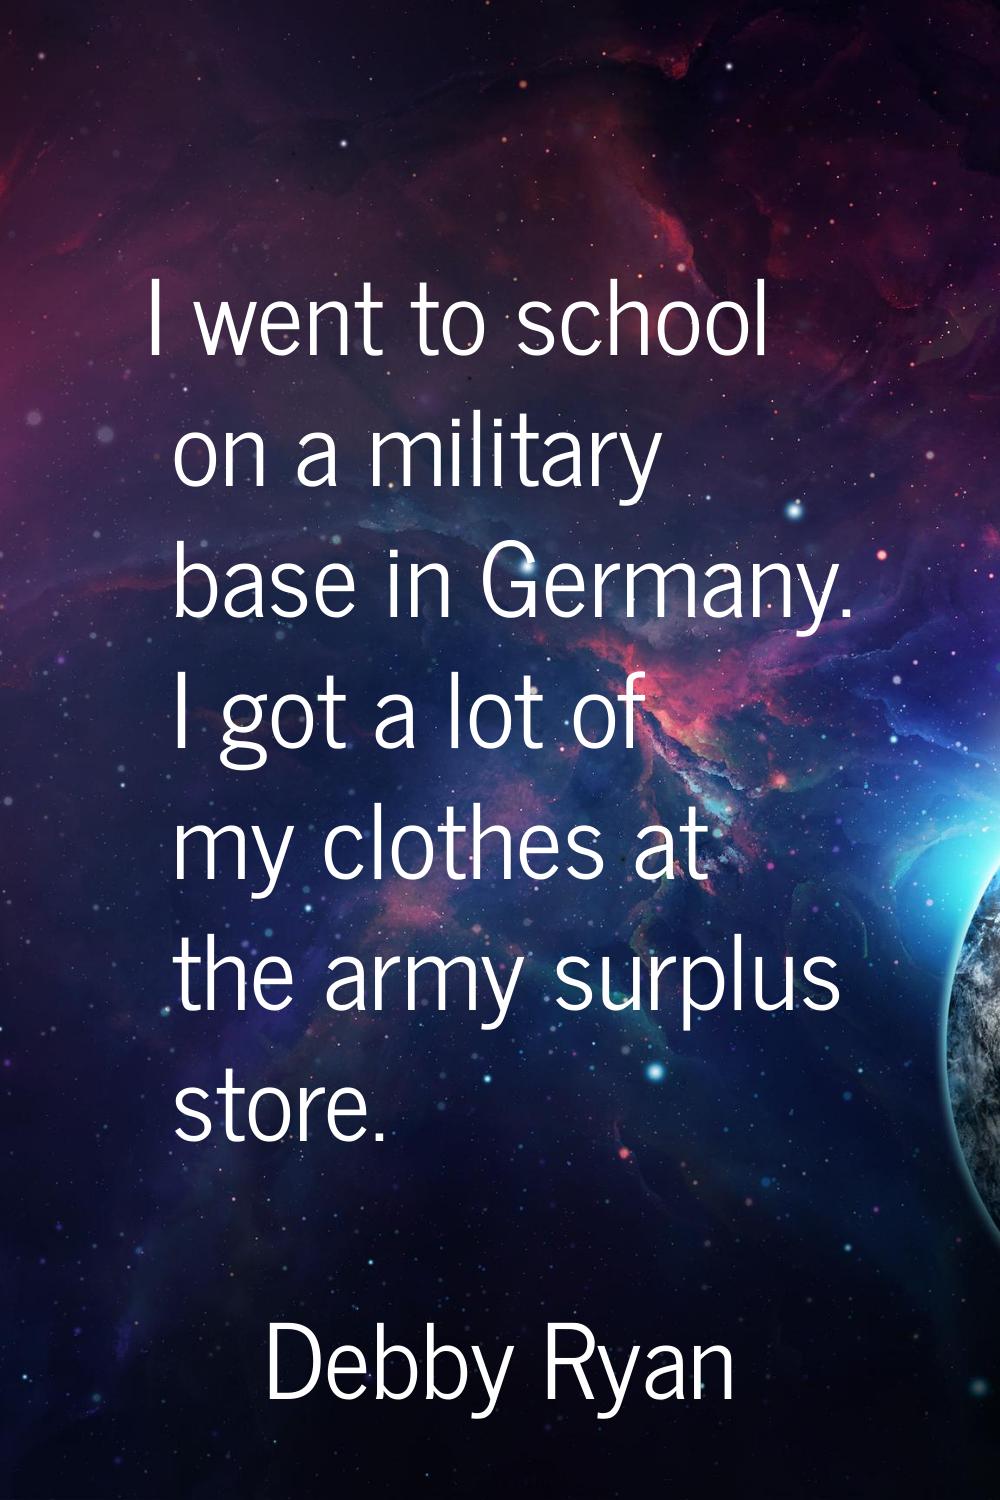 I went to school on a military base in Germany. I got a lot of my clothes at the army surplus store